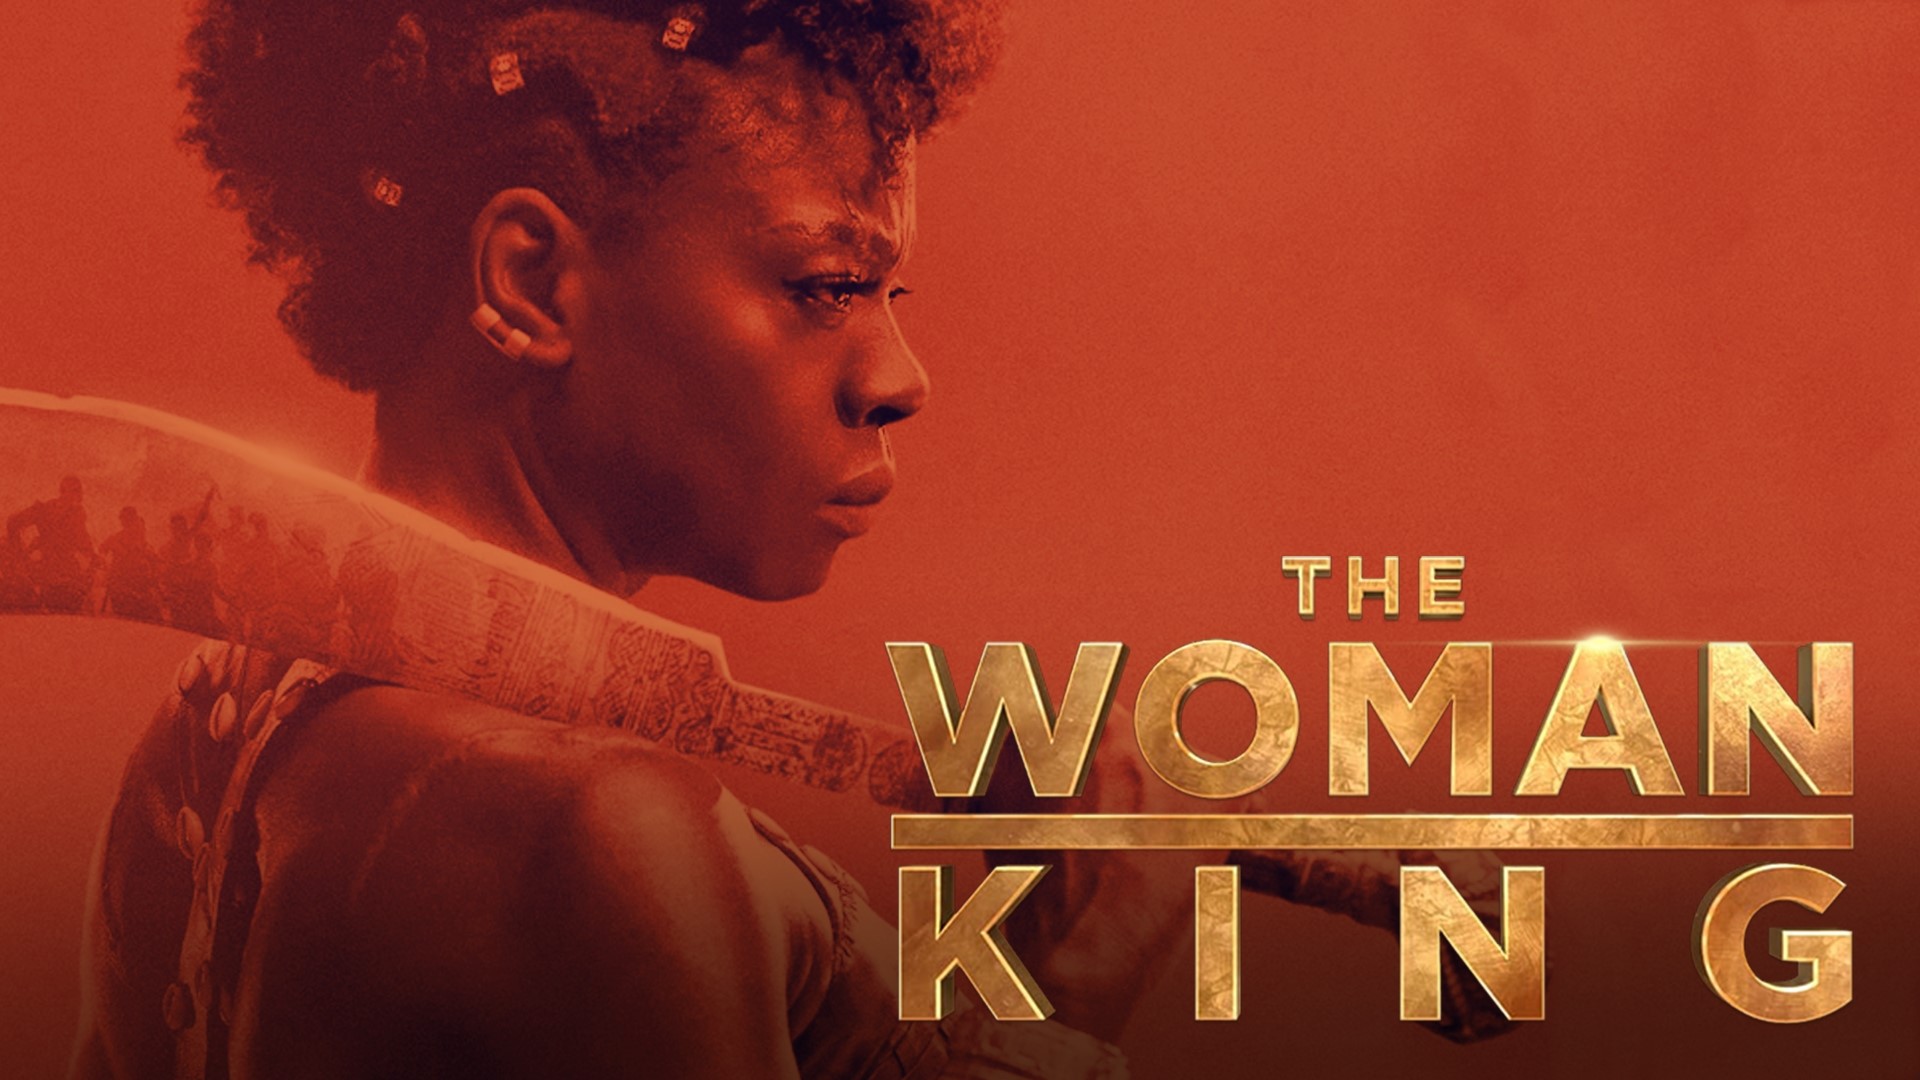 Viola Davis leads a strong cast that all disappear into their roles, bringing life to The Woman King, which is loosely based on the Dahomey tribe and the slave trade